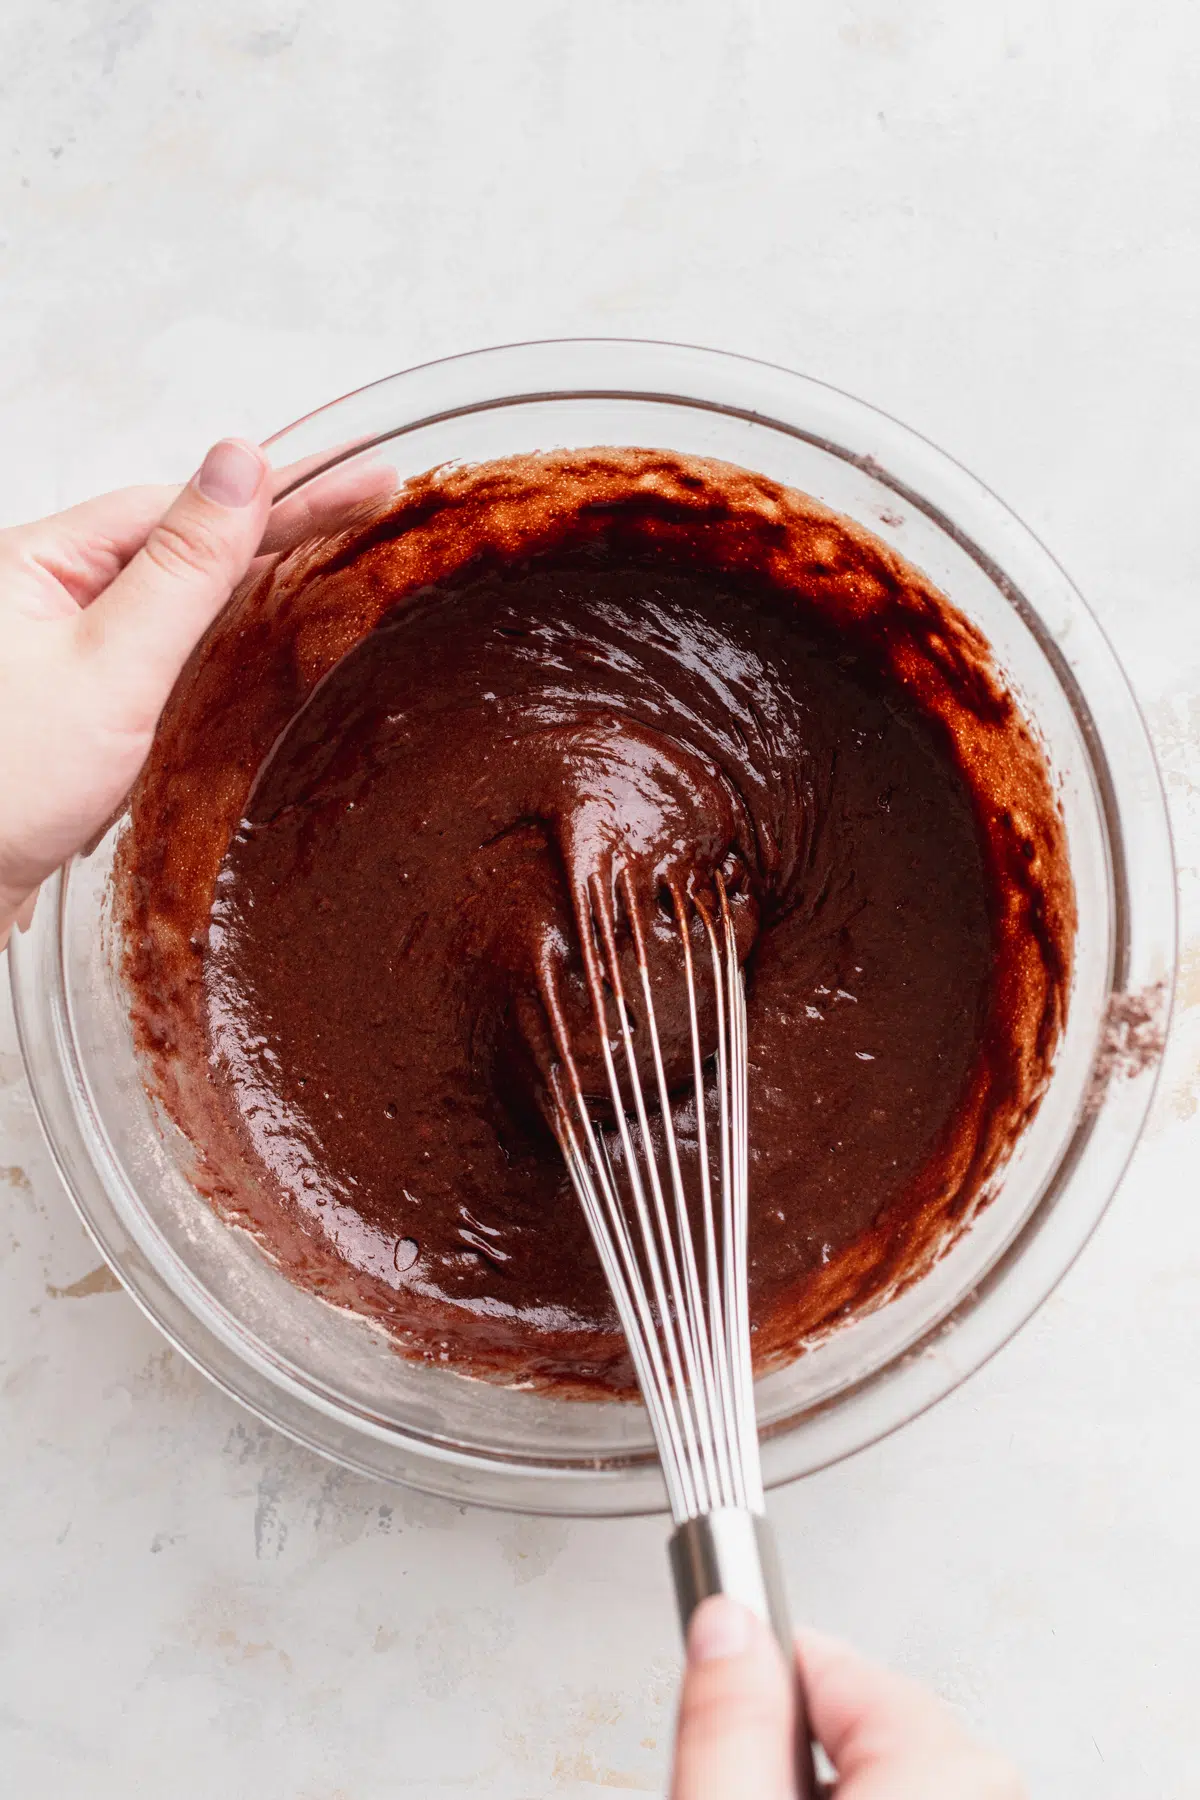 Chocolate cake batter in glass bowl.